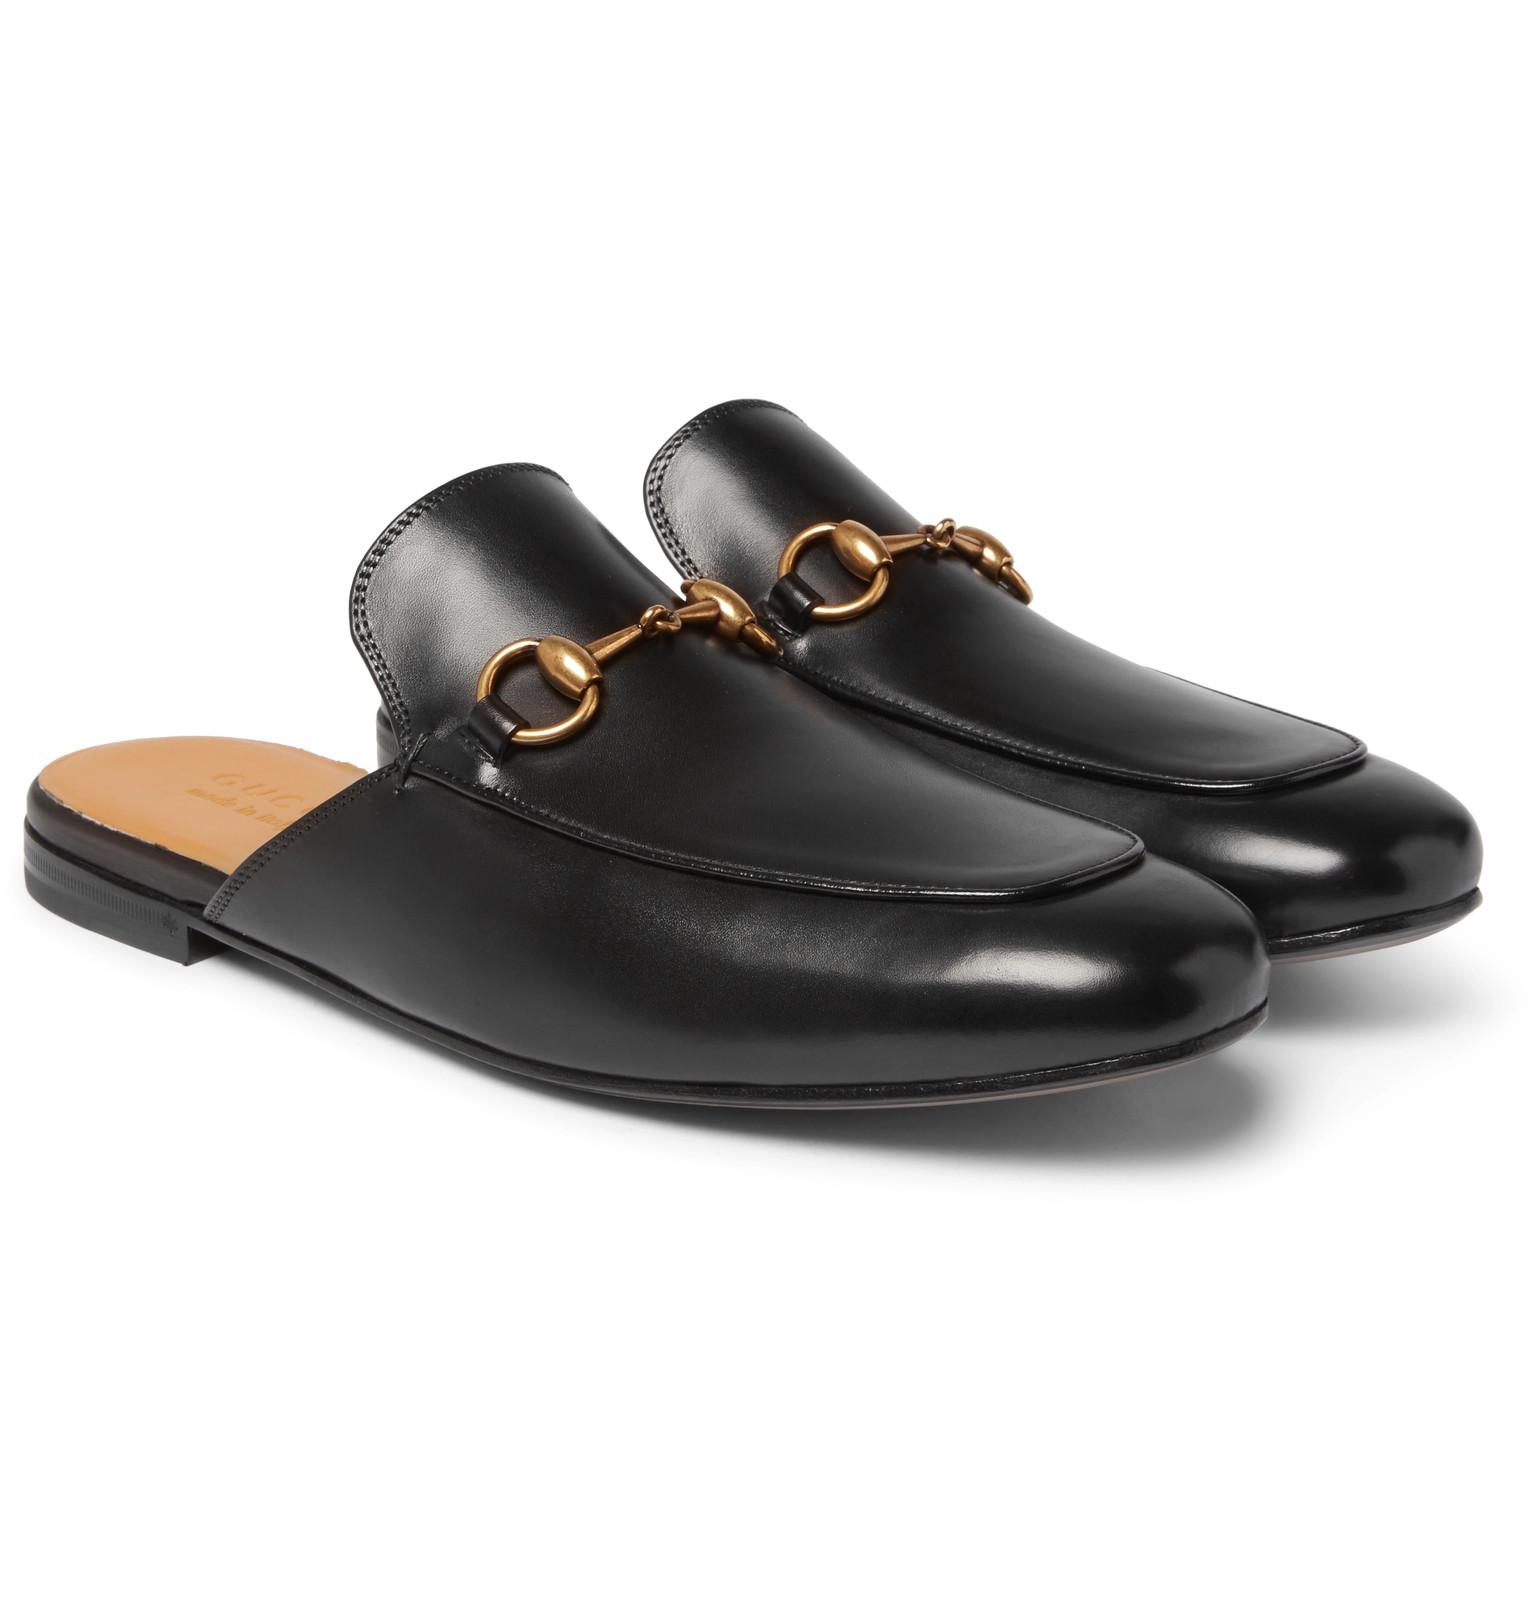 Lyst - Gucci Kings Horsebit Leather Backless Loafers in Black for Men